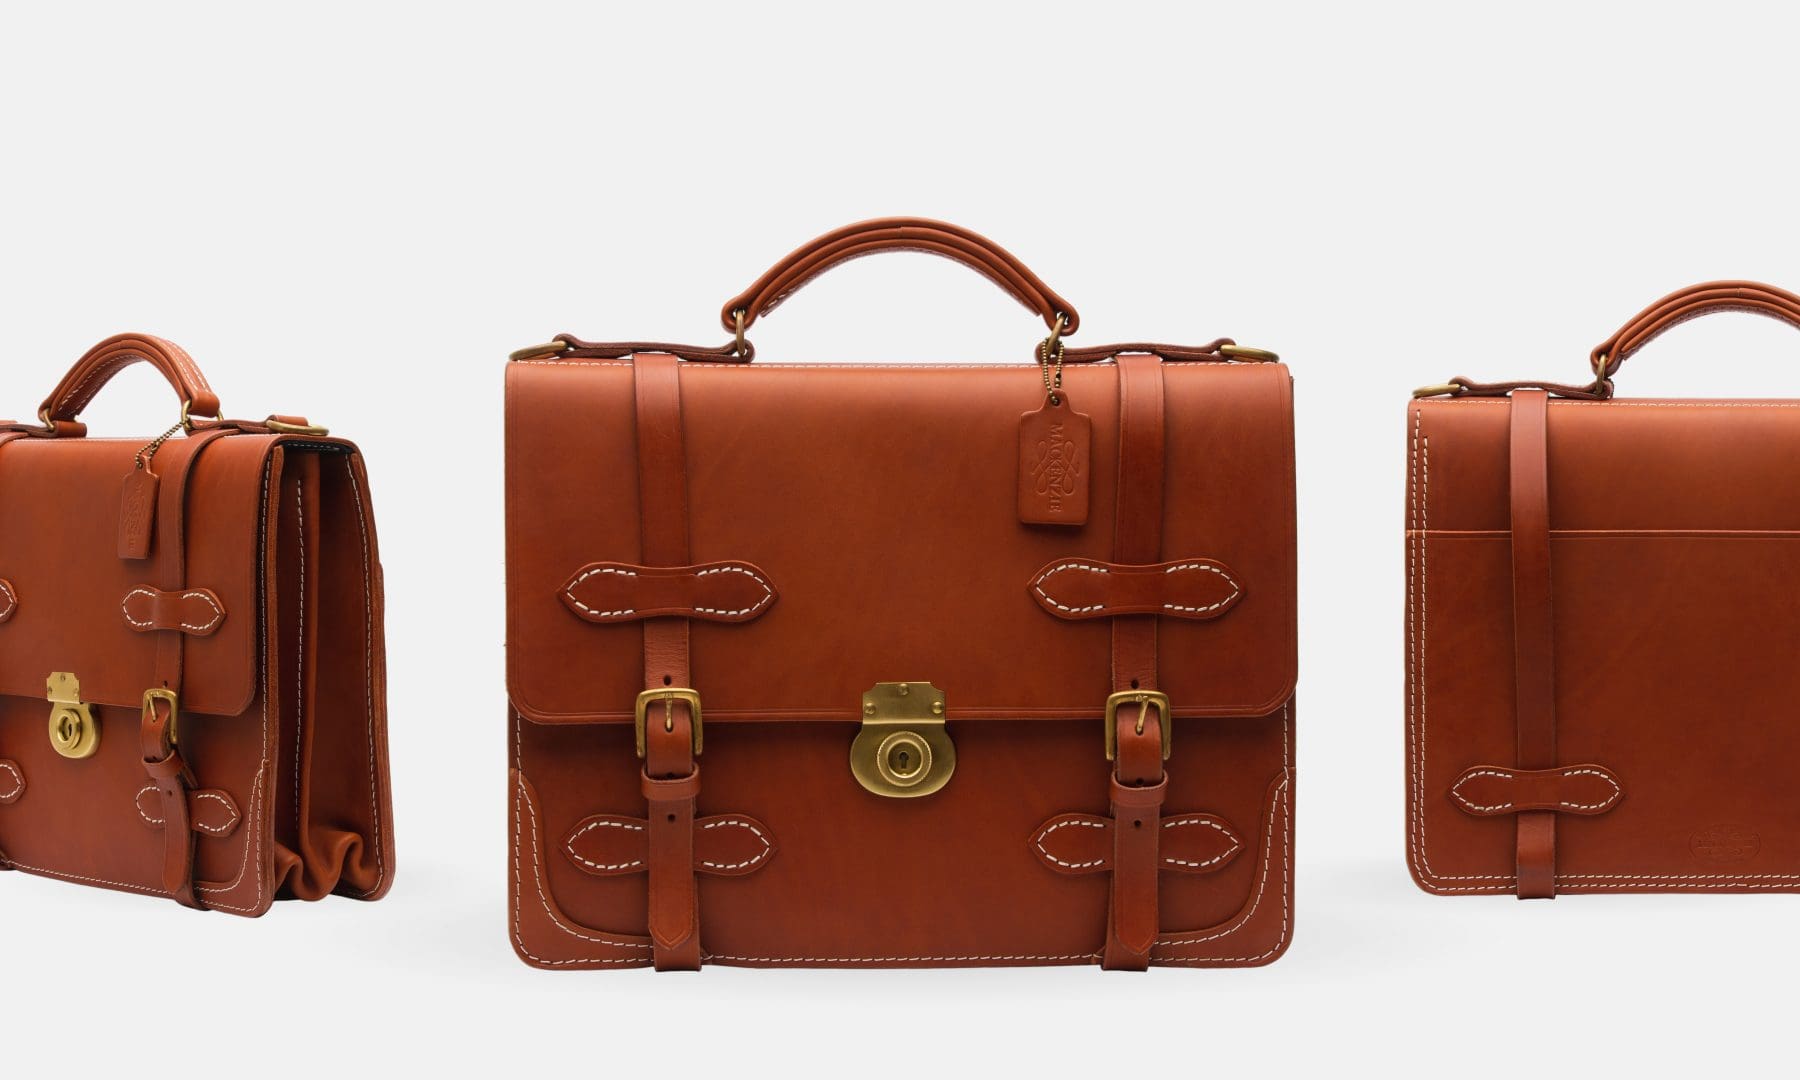 Mackenzie Briefcases Officers scaled Which Briefcase is Best?